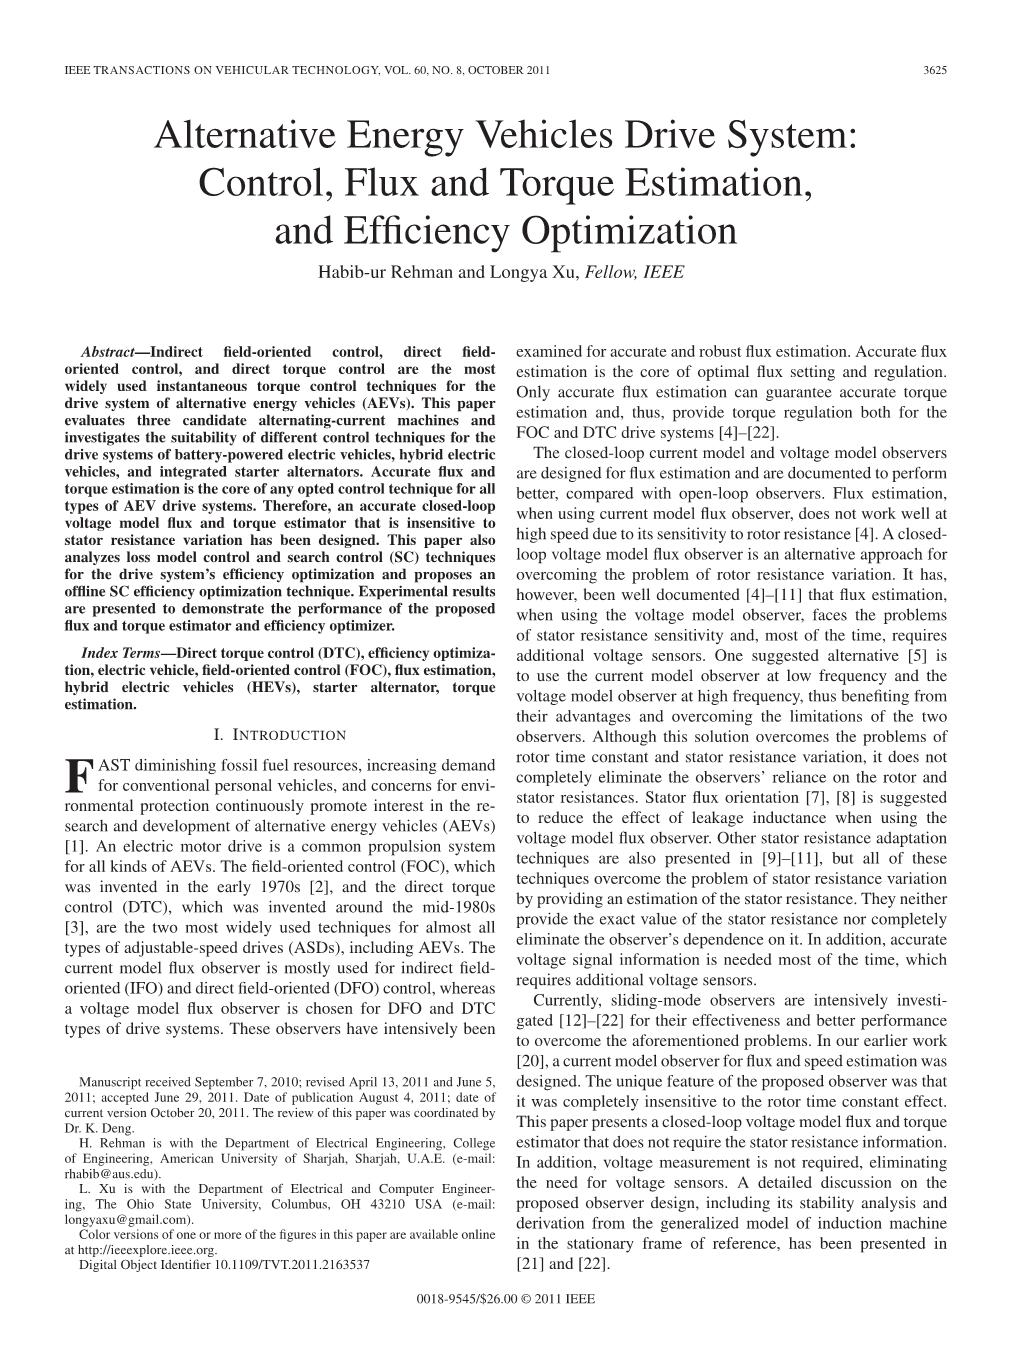 Control, Flux and Torque Estimation, and Efficiency Optimization 3627